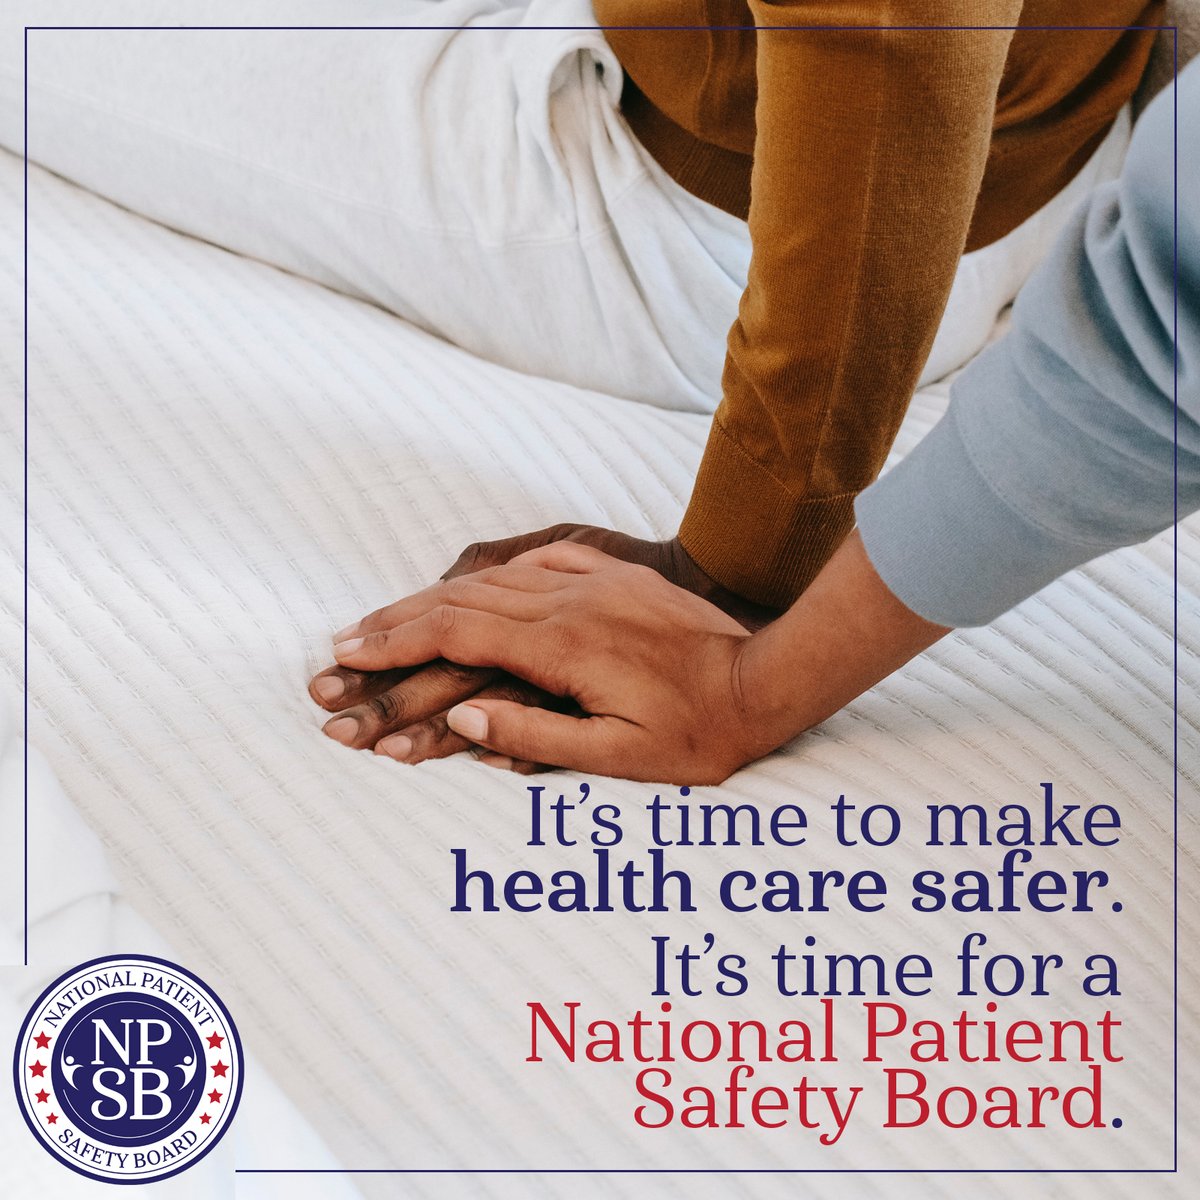 .@FamiliesUSA is part of a growing coalition of leading healthcare organizations in support of a National Patient Safety Board to use existing data, patient-reported accounts & experts to prevent patient harm. Get your org involved, join the coalition: npsb.org/join-the-coali…